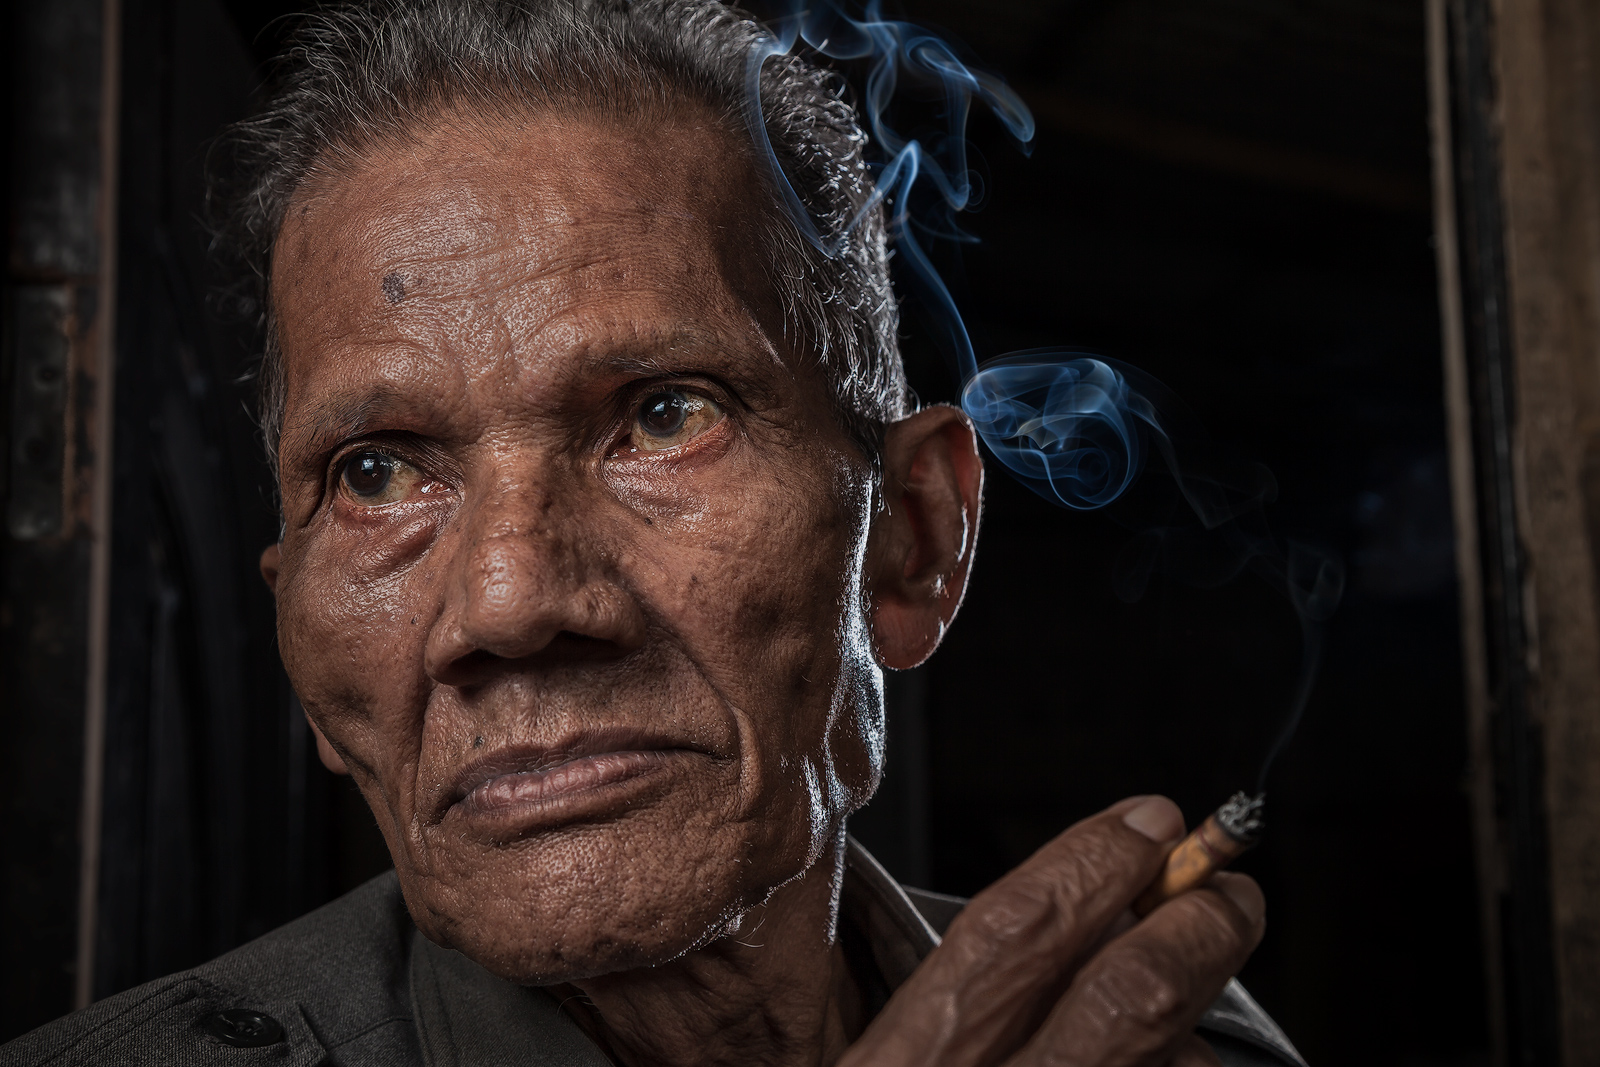 Close-up portrait of an Indonesian man smoking in the doorway to his home.